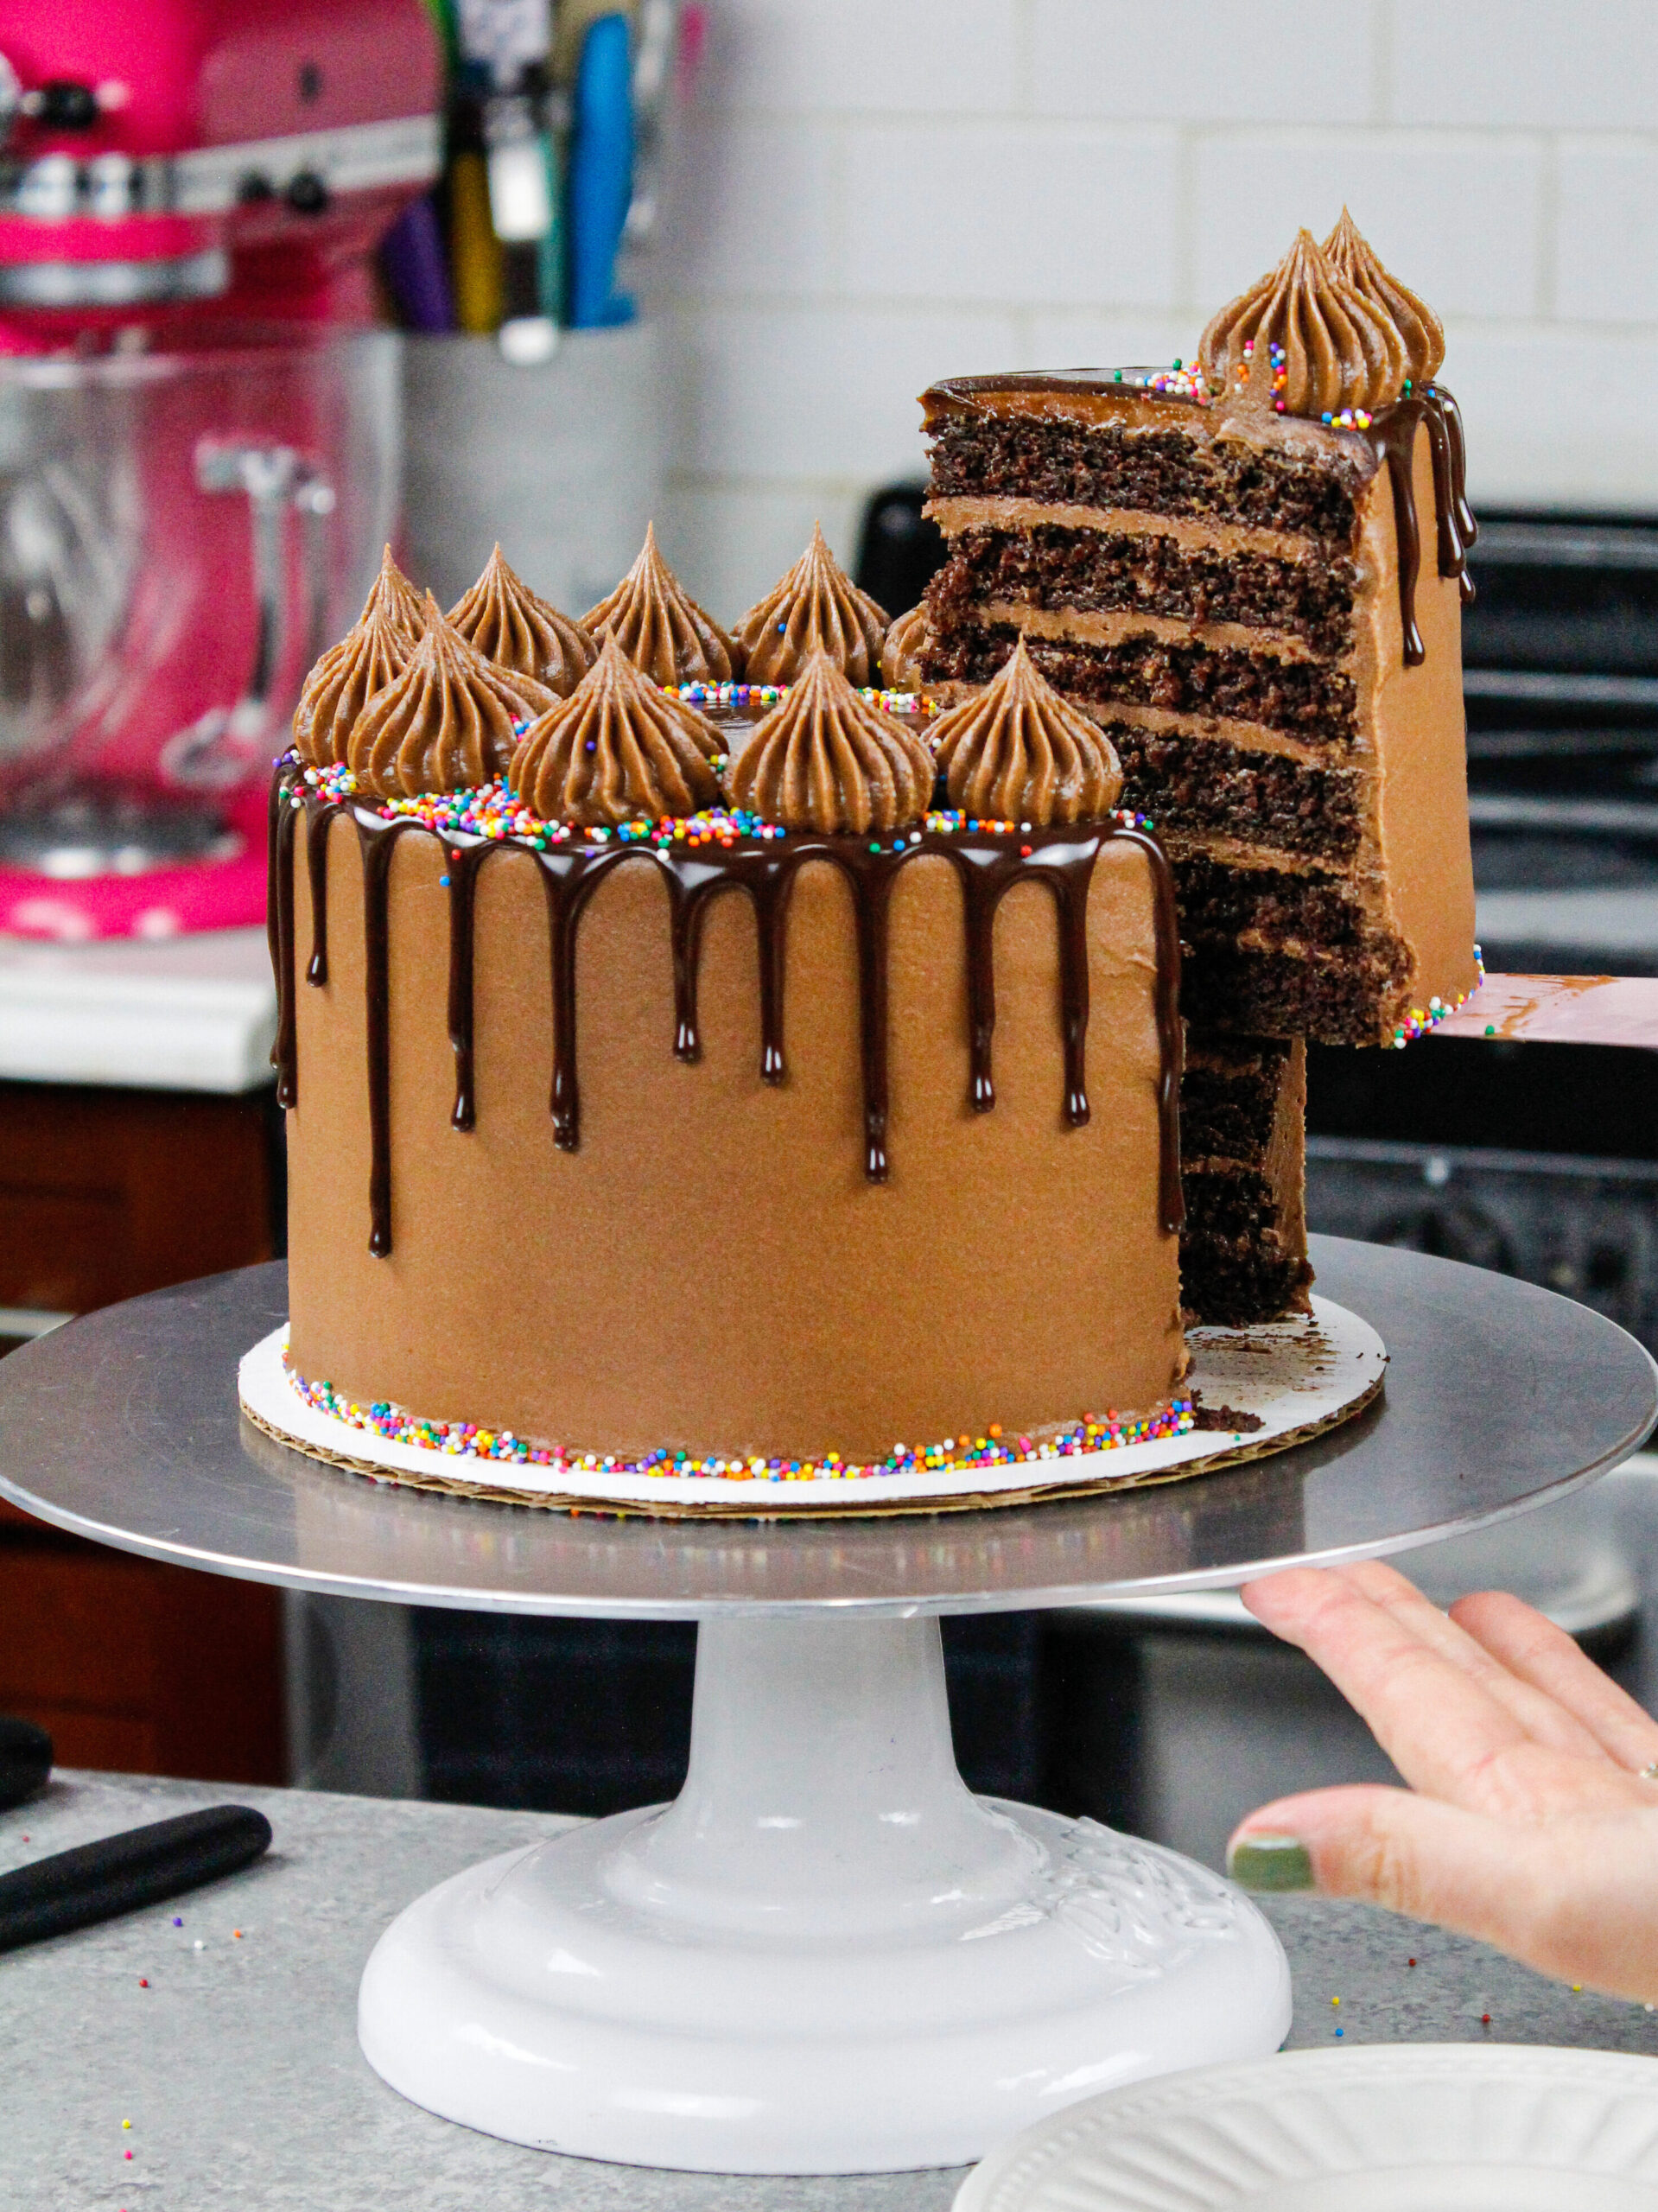 image of a chocolate drip cake that's been cut into and is having a slice pulled out to show it's six layers